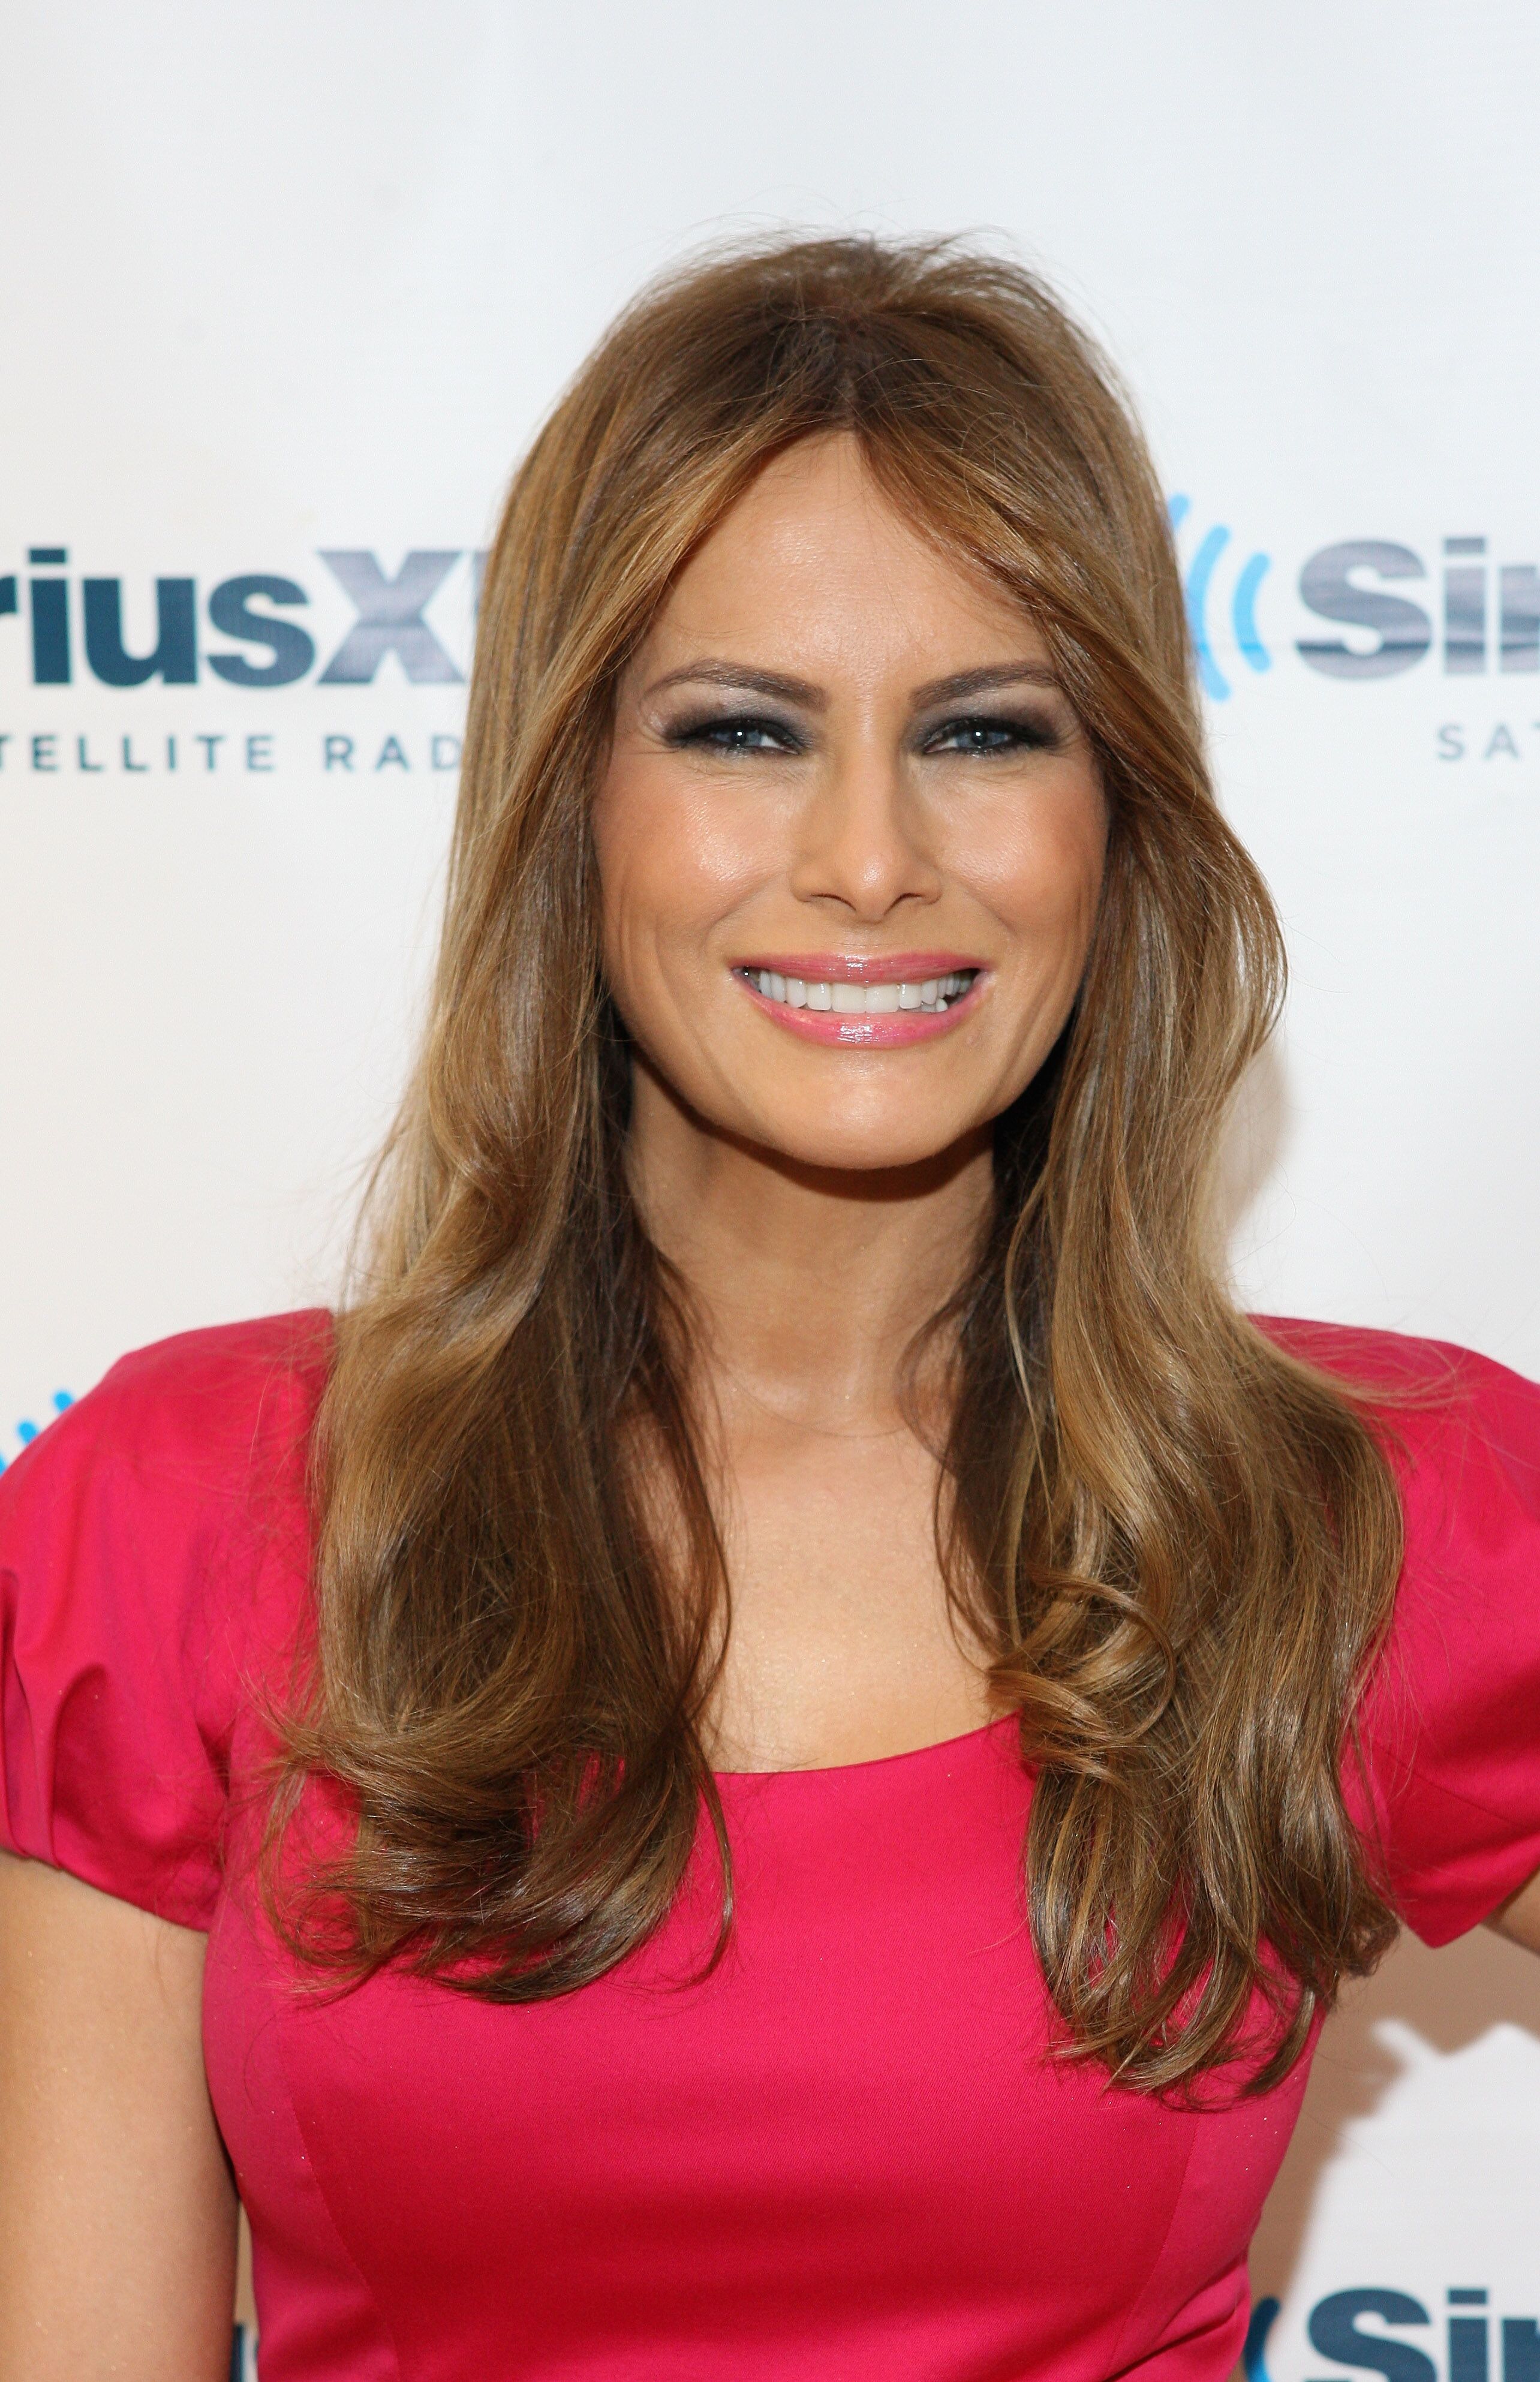 Model/mother/entrepreneur Melania Trump visits SiriusXM Studio to promote her new QVC Melania Timepieces & Jewelry Collection on Cosmo Radio on April 20, 2011 in New York City | Photo: Getty Images